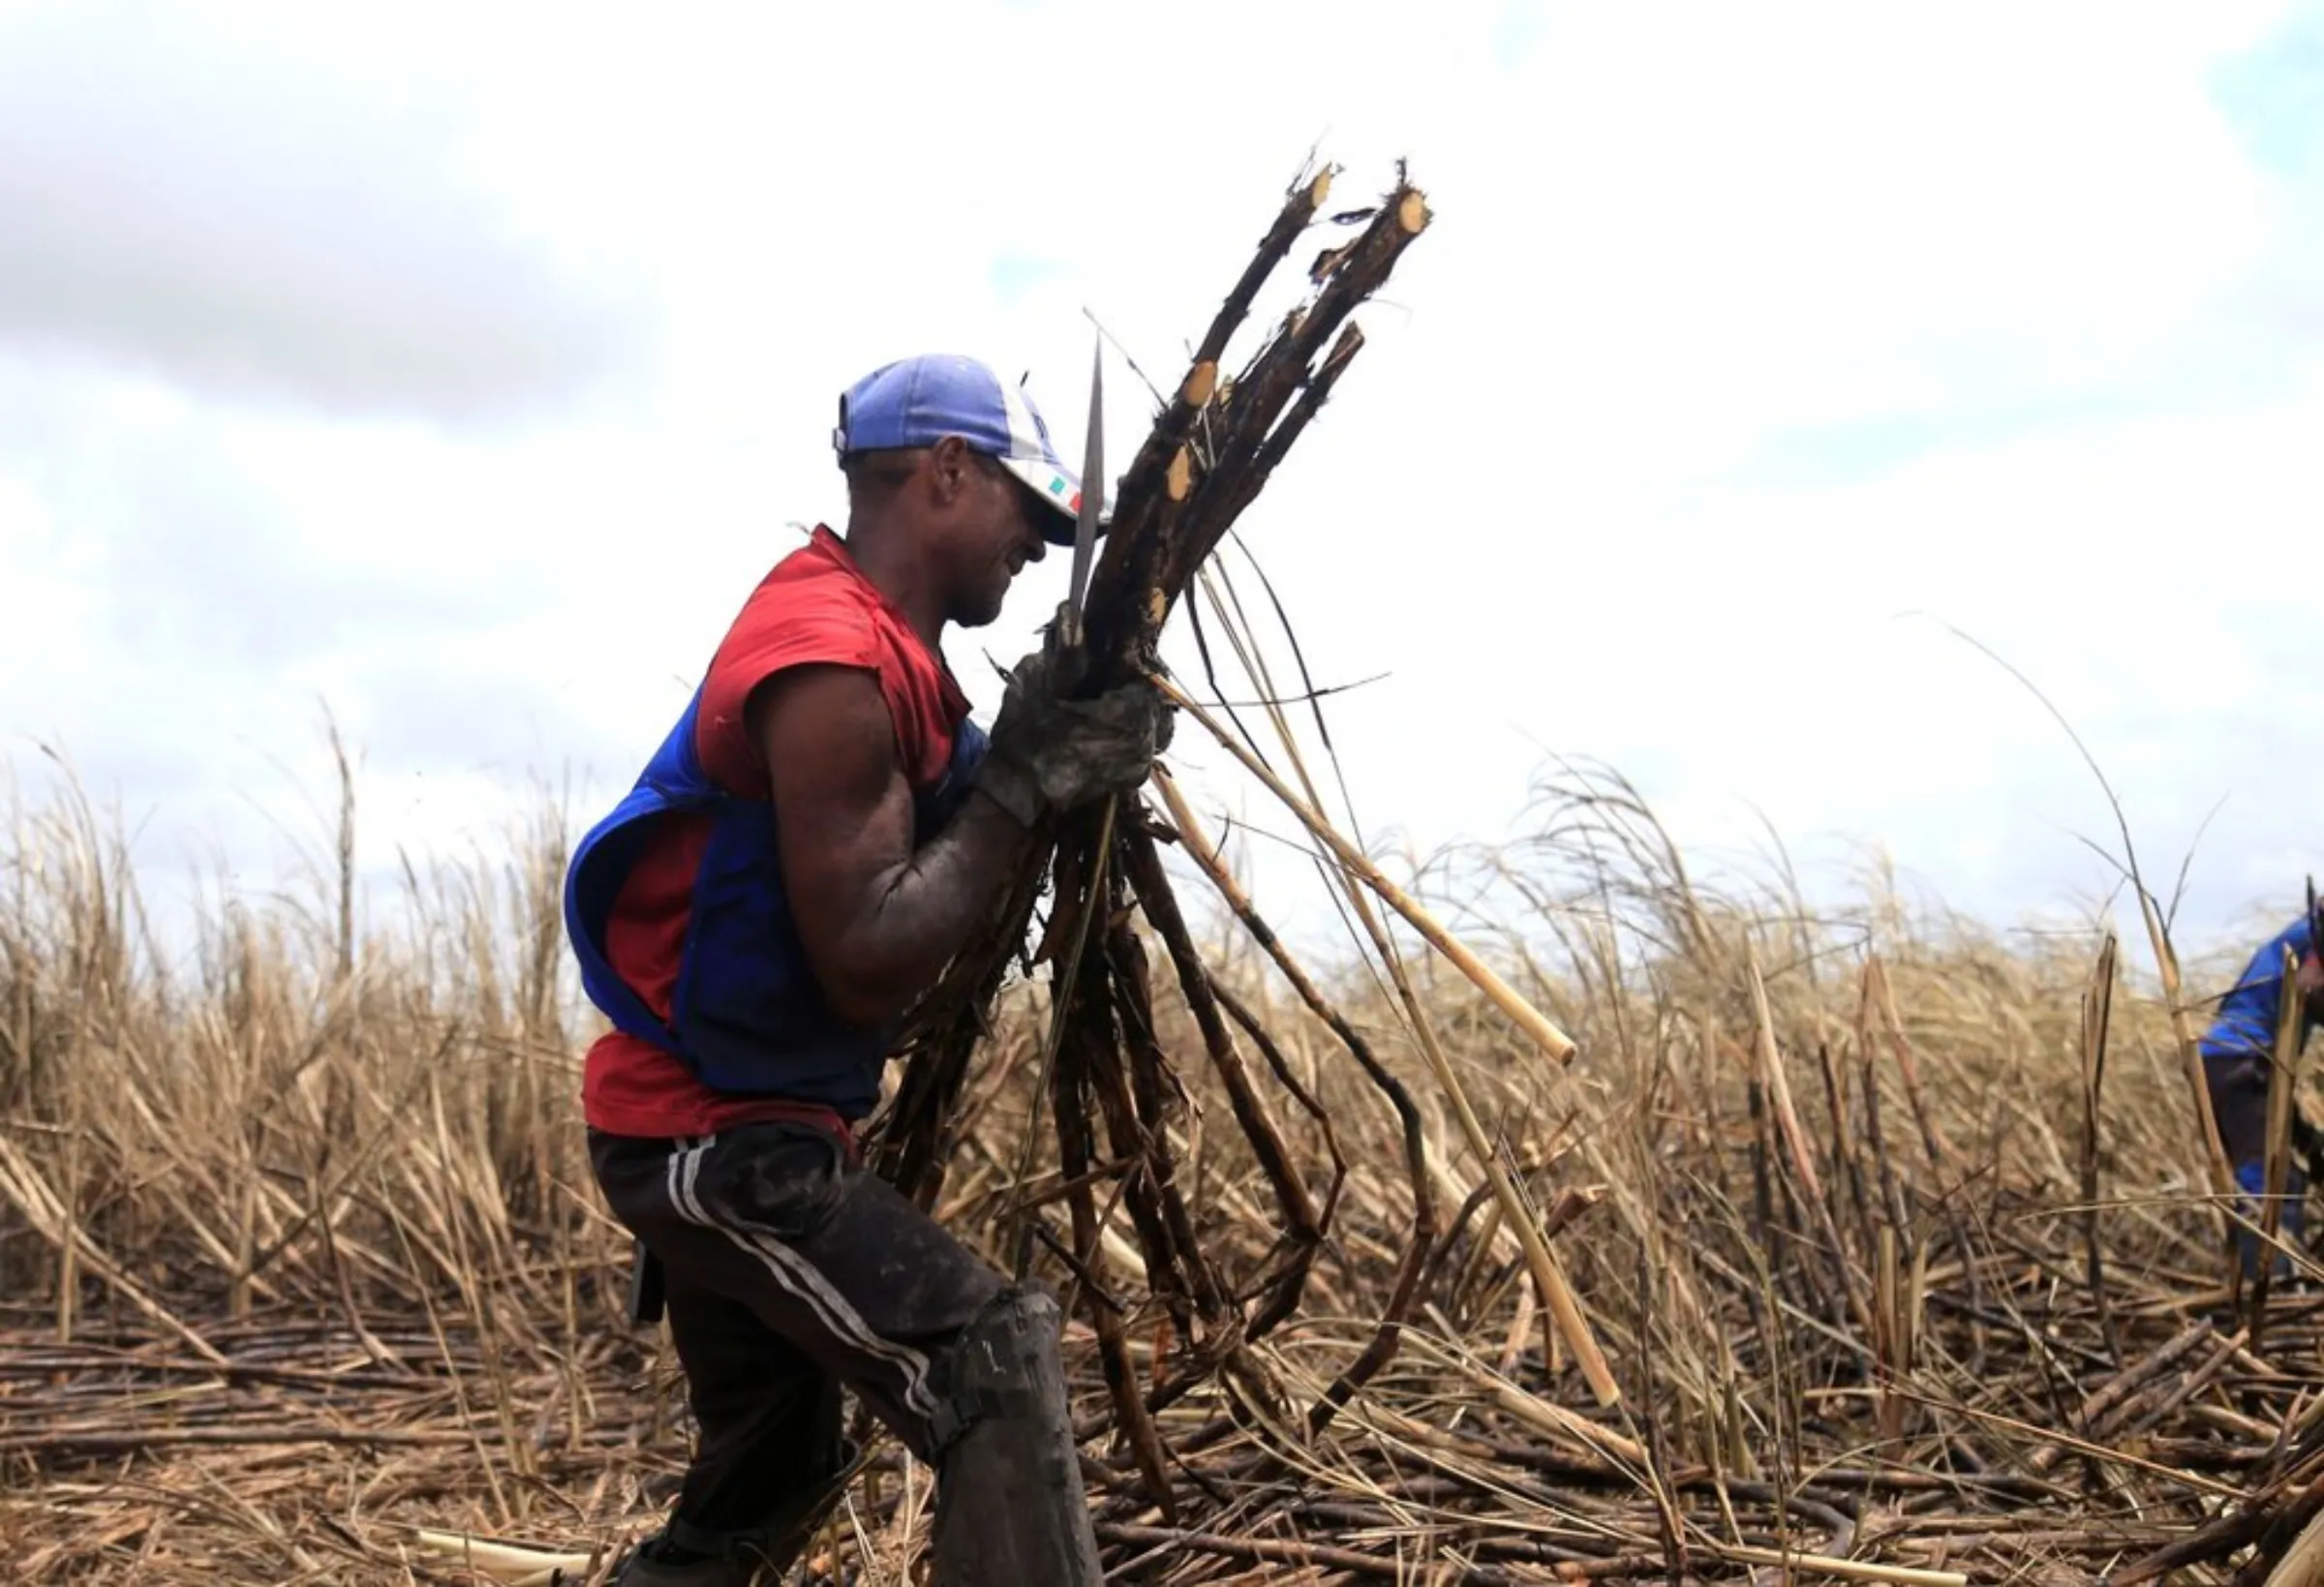 A worker harvests sugarcane in a plantation near Maceio, Brazil, on September 27, 2021